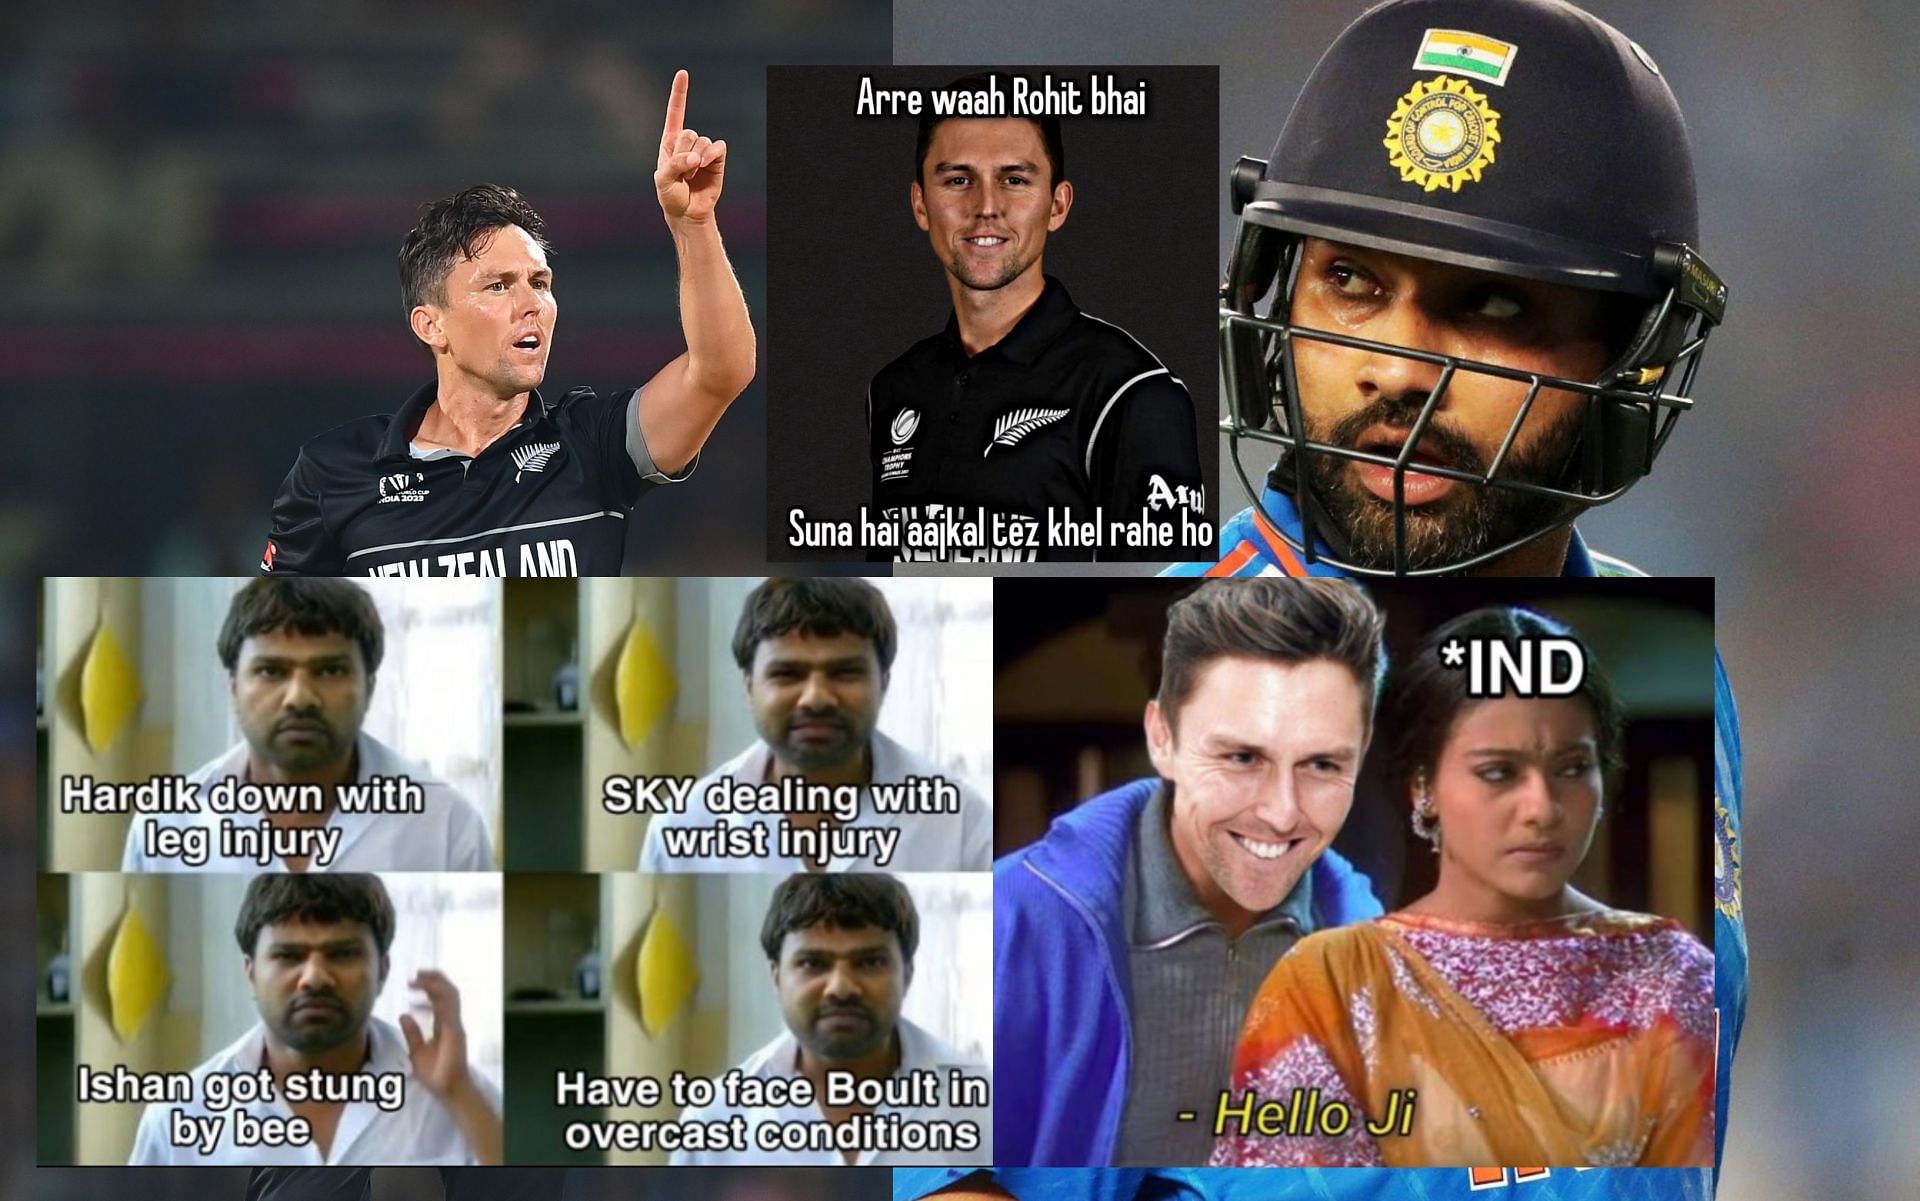 Fans react ahead of the India vs New Zealand match.